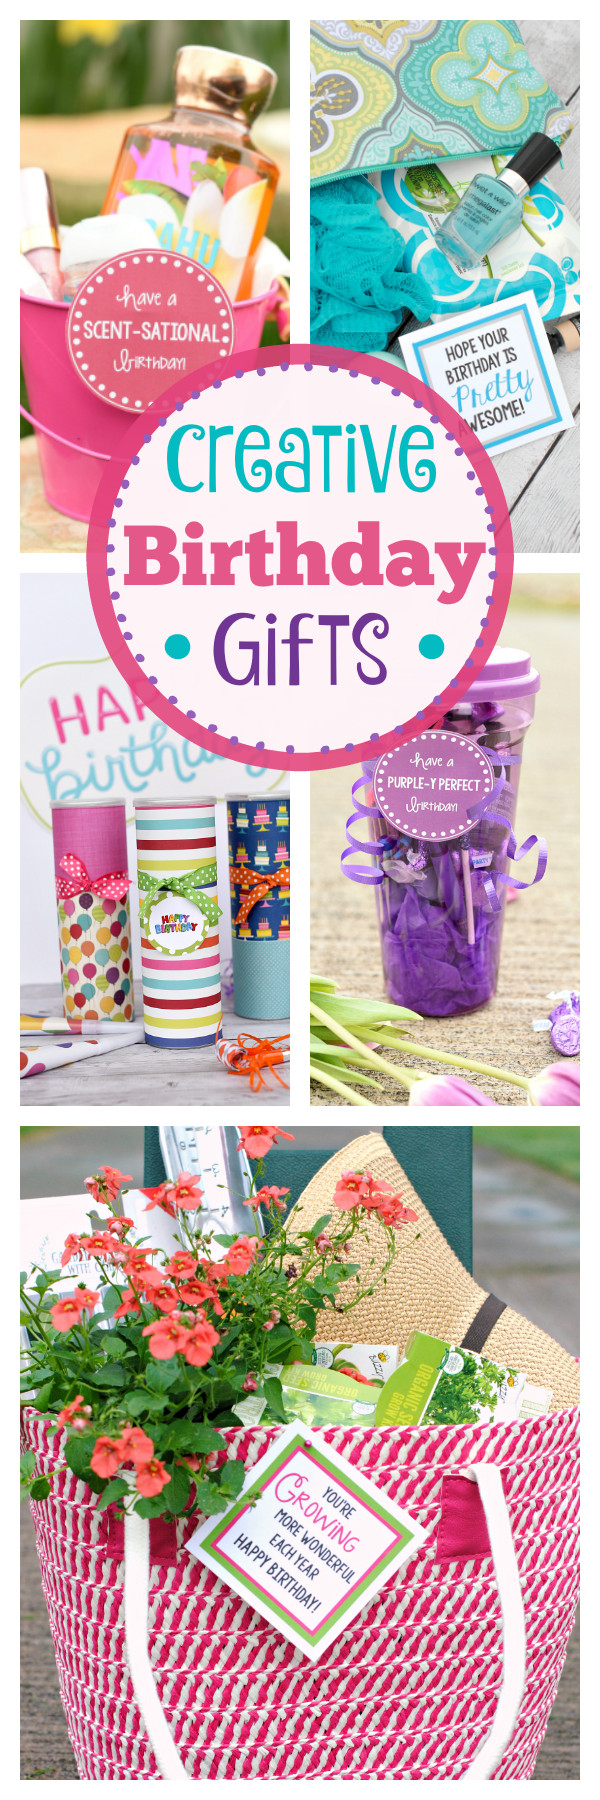 Nice Birthday Gifts
 Creative Birthday Gifts for Friends – Fun Squared